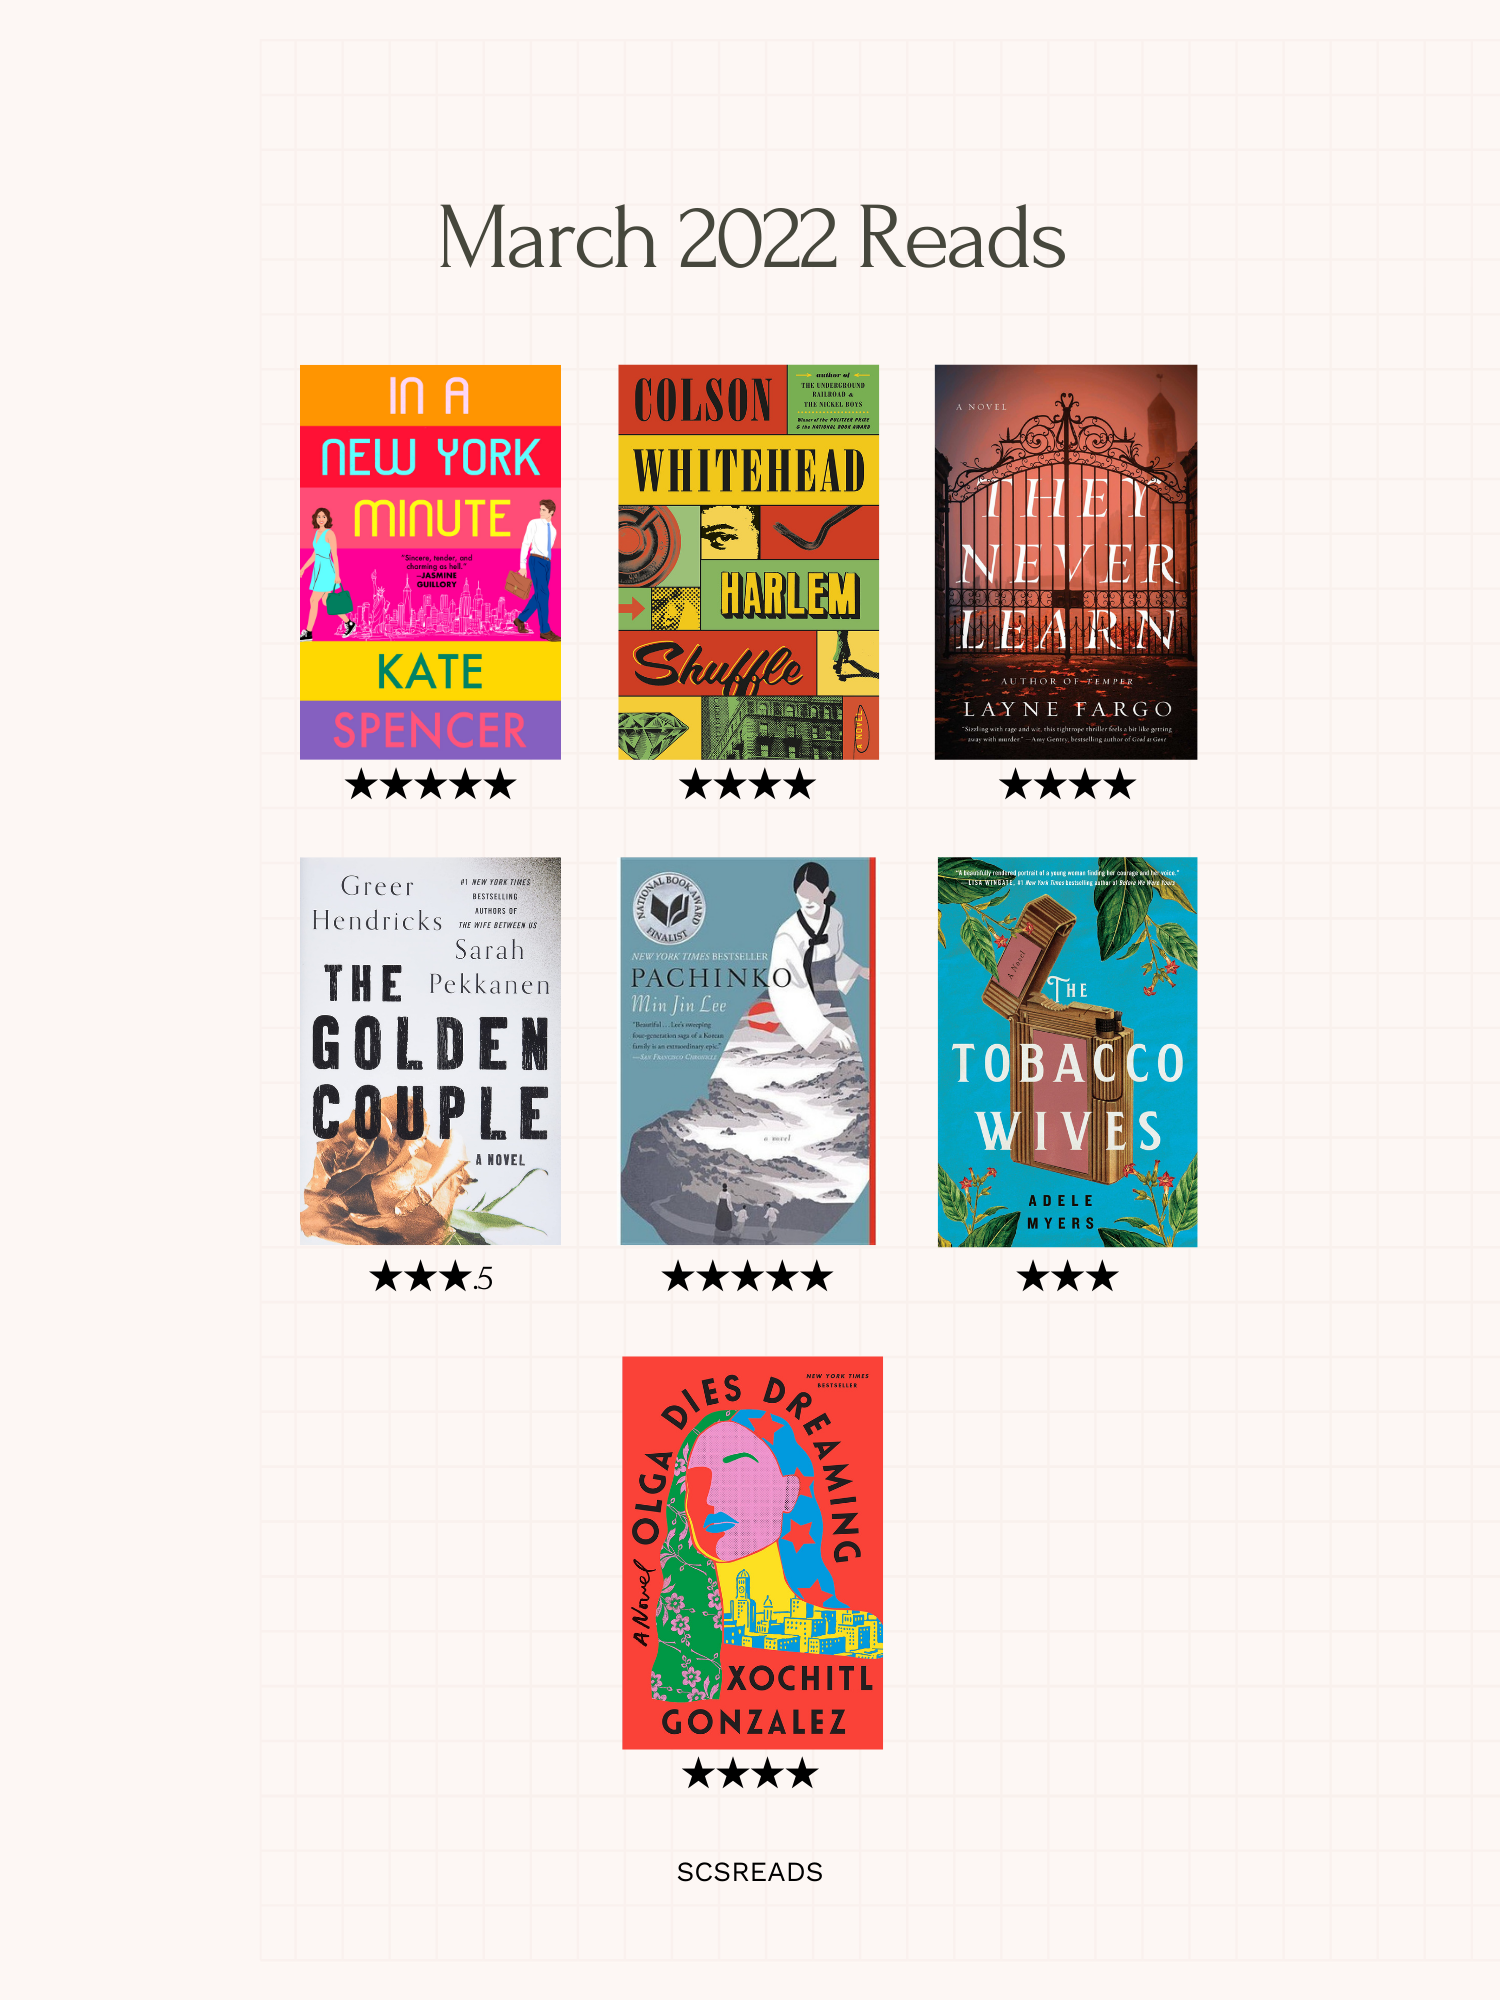 march 2022 reads, mini book reviews, olga dies dreaming mini review, 2022 books, literary fiction books, pachinko review